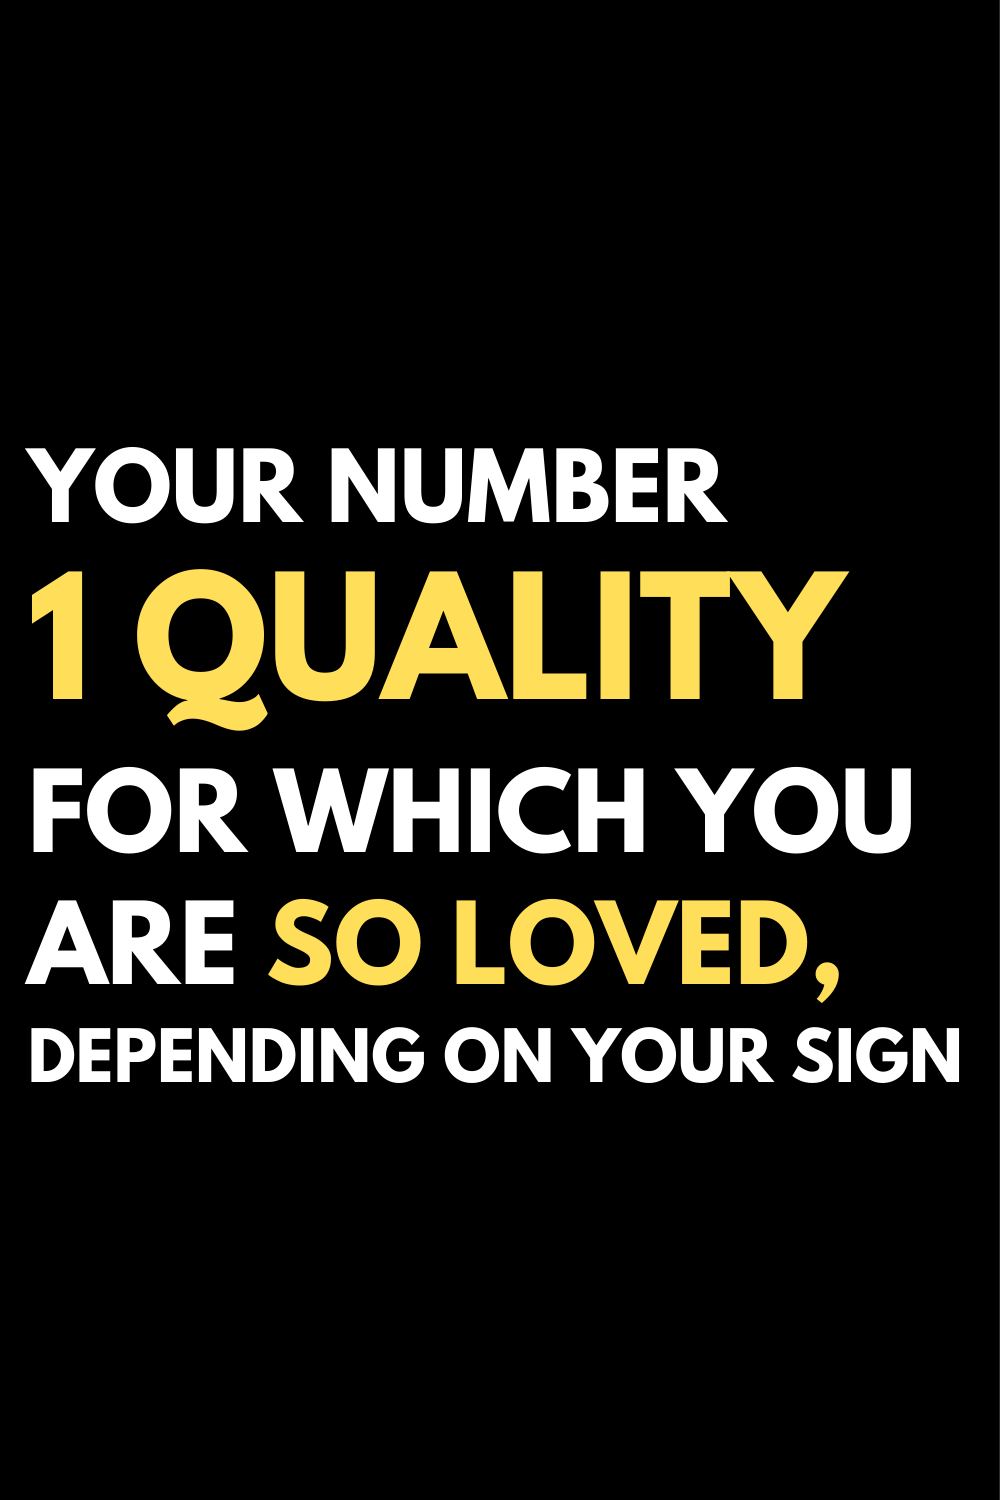 Your number 1 quality for which you are so loved, depending on your sign